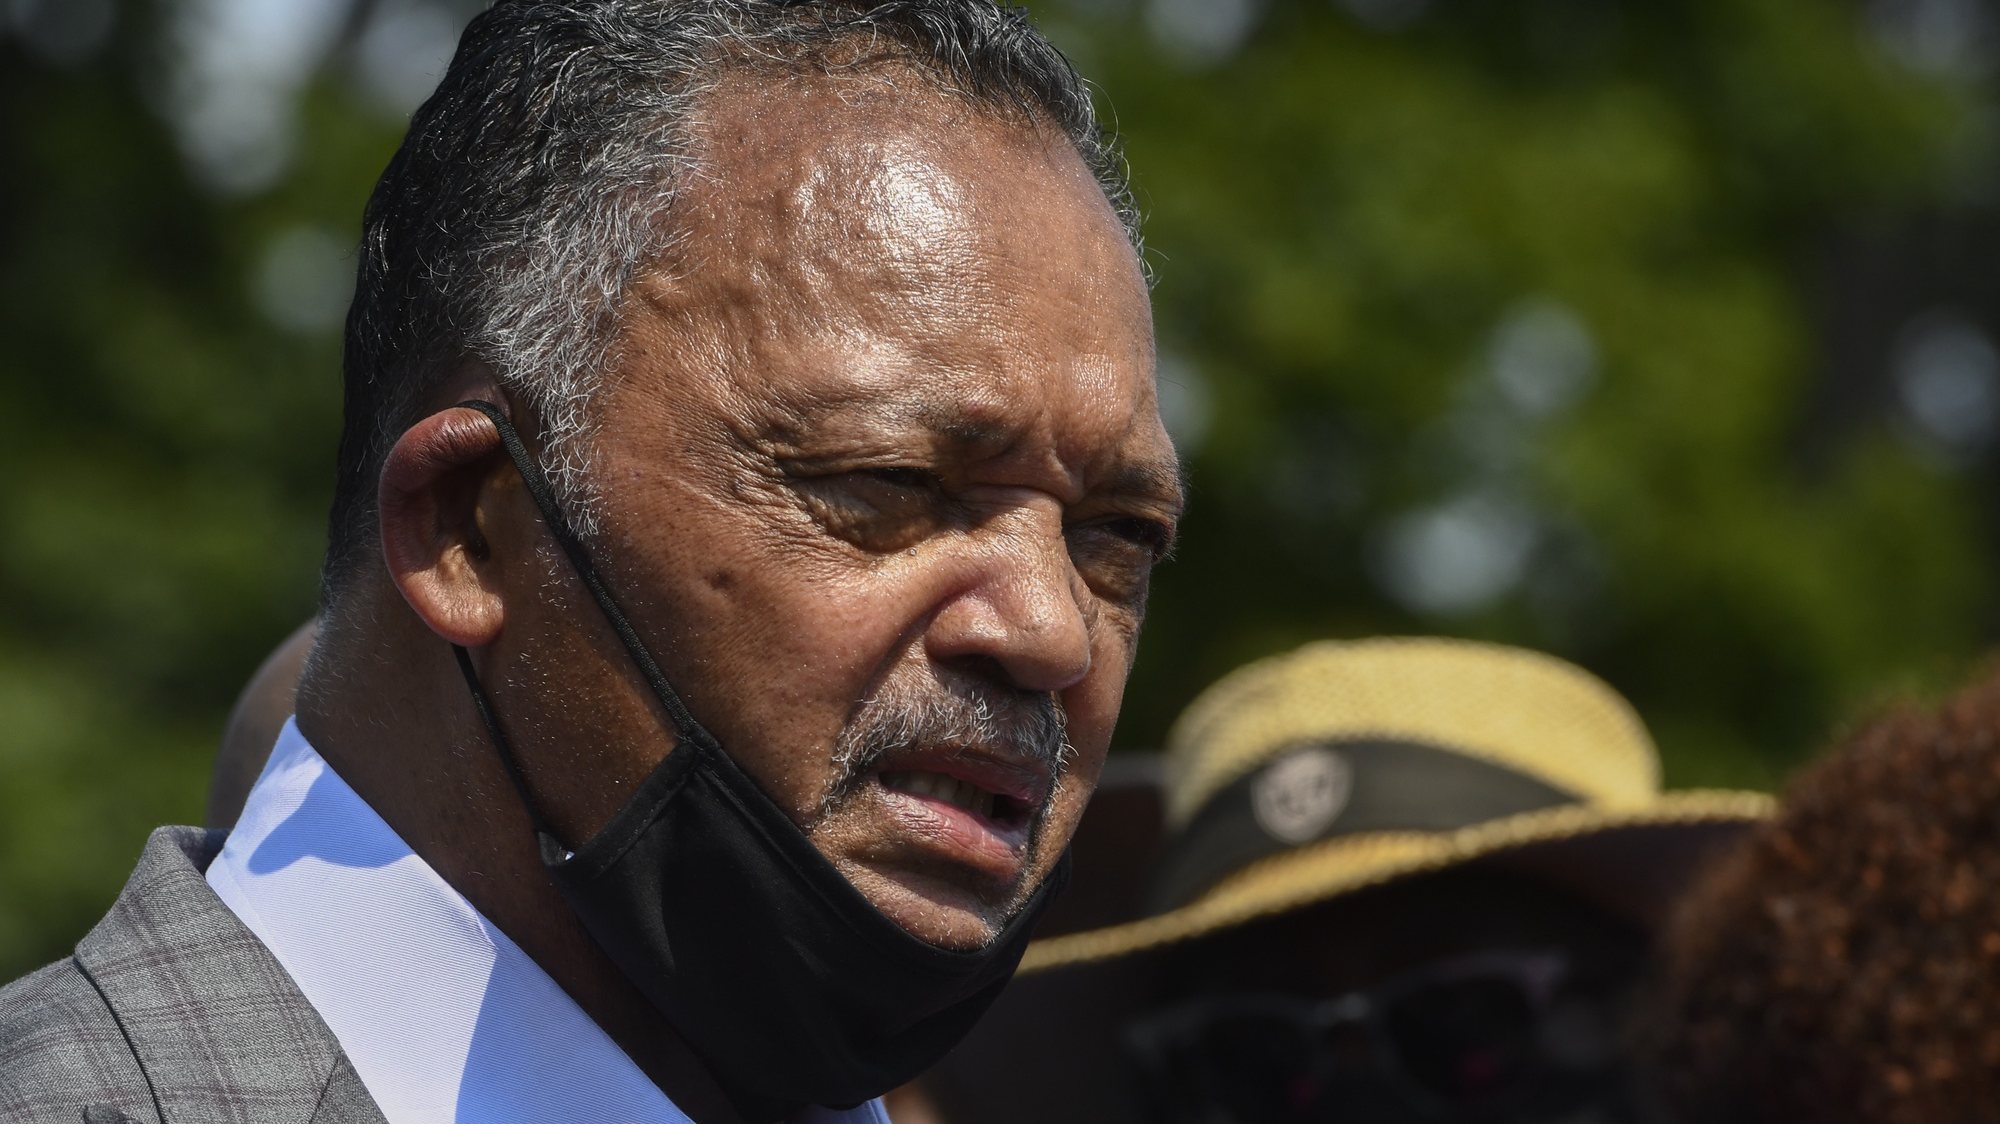 epa09424227 (FILE) - The Rev. Jesse Jackson speaks during a press conference in the wake of the shooting of Jacob Blake by police officers, in Kenosha, Wisconsin, USA, 27 August 2020 (reissued 22 August 2021). According to a statement issued by the Rainbow PUSH Coalition on 21 August 2021, Jesse Jackson Sr. and his wife Jaqueline tested positive for COVID-19, and were subsequently hospitalized.  EPA/MATT MARTON